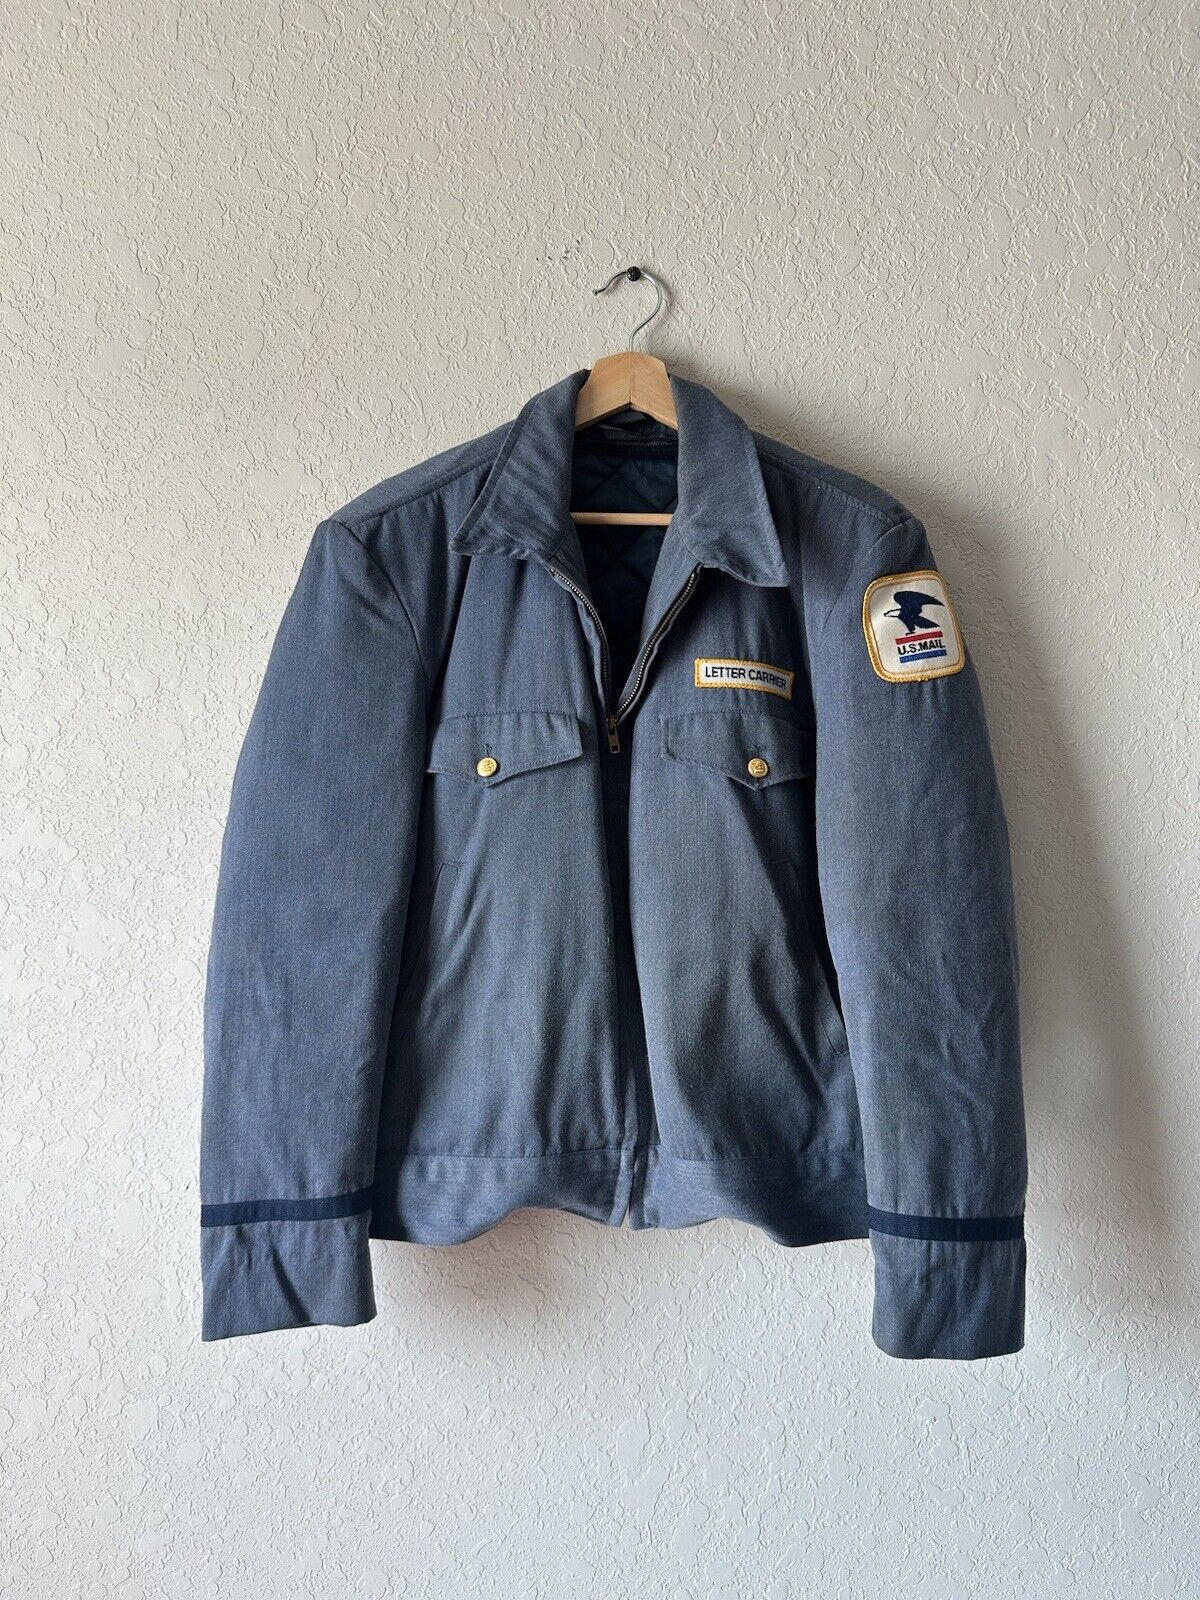 Vintage USPS Letter Carrier Jacket 42R Discontinued 80s Rare Collectible